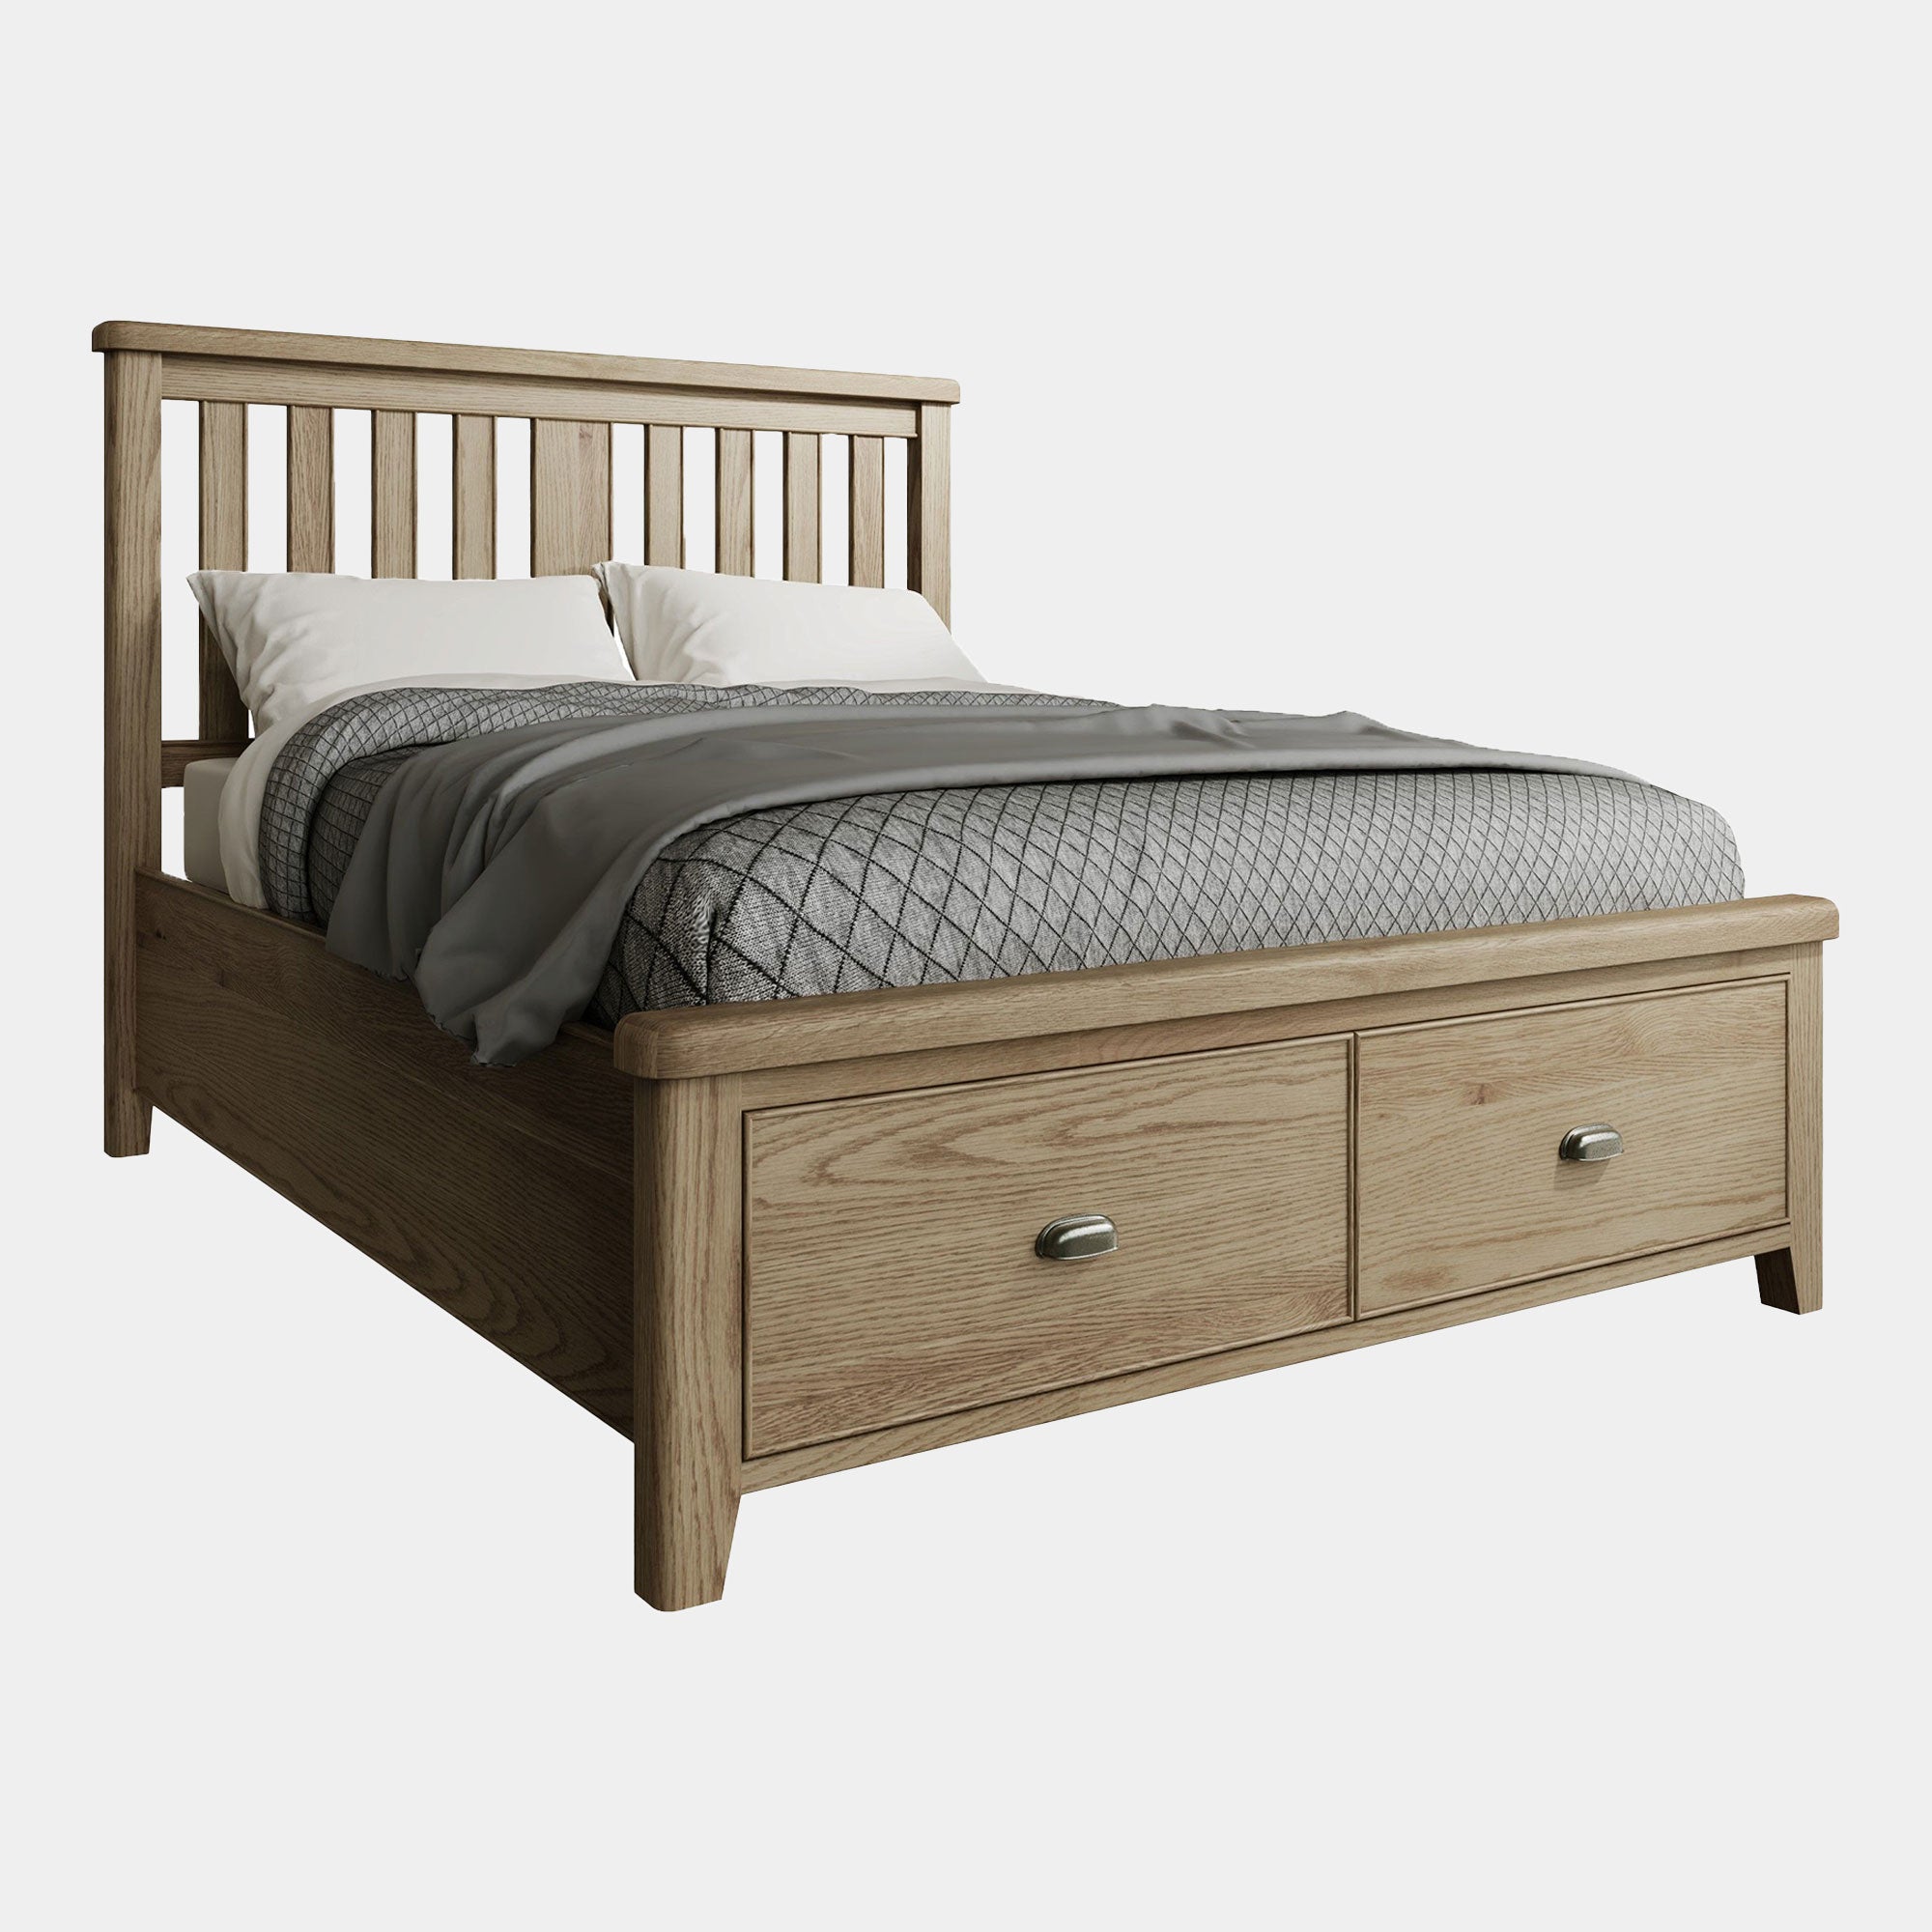 Farringdon - Bed Frame With Footboard Drawer In Oak Finish 150cm